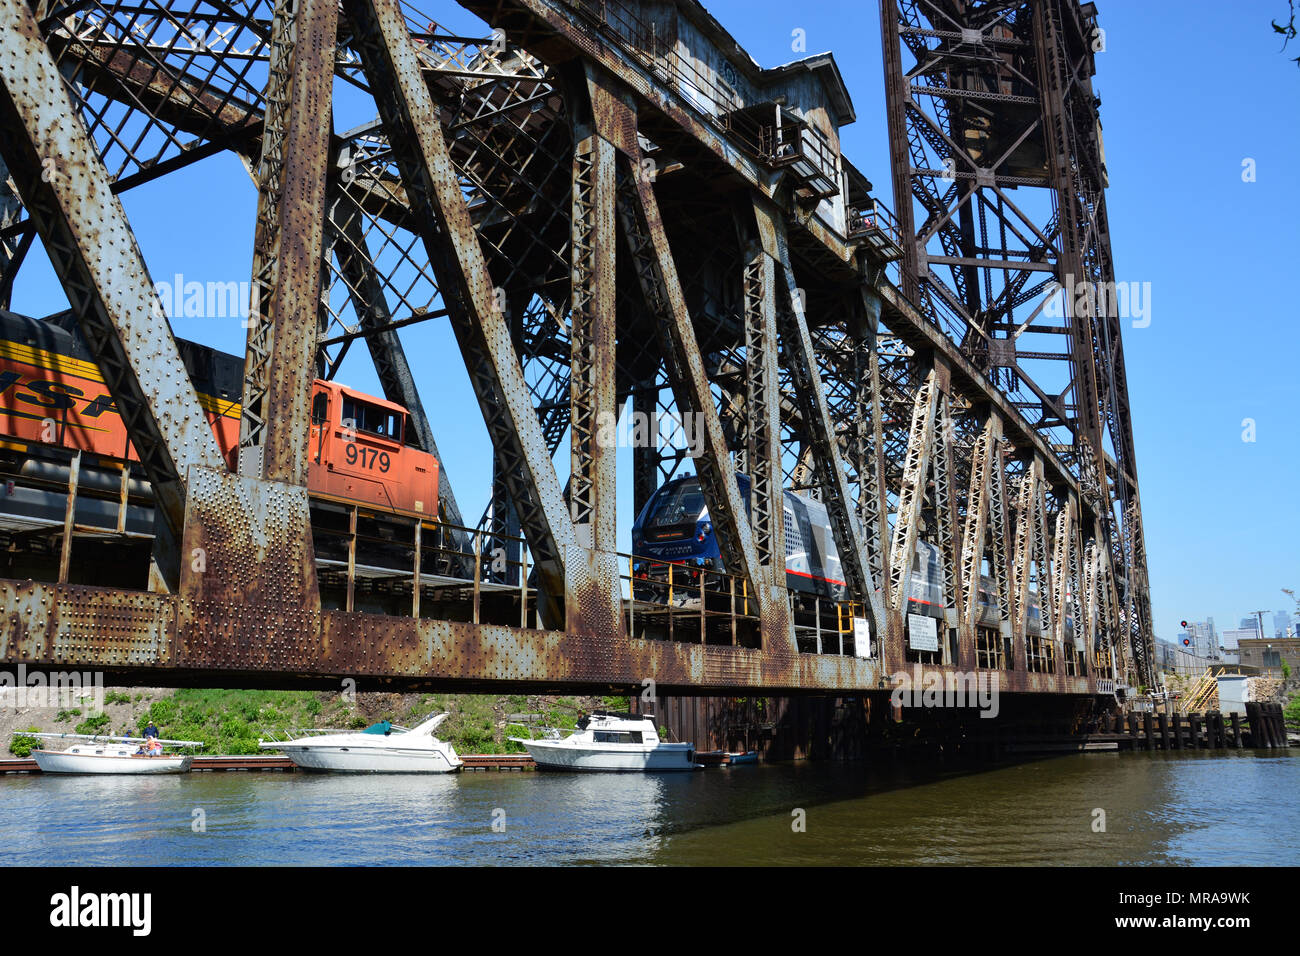 An Amtrack passenger train and BNSF freight train cross the Chicago River on the Canal Street railroad lift bridge on Chicago's south side. Stock Photo